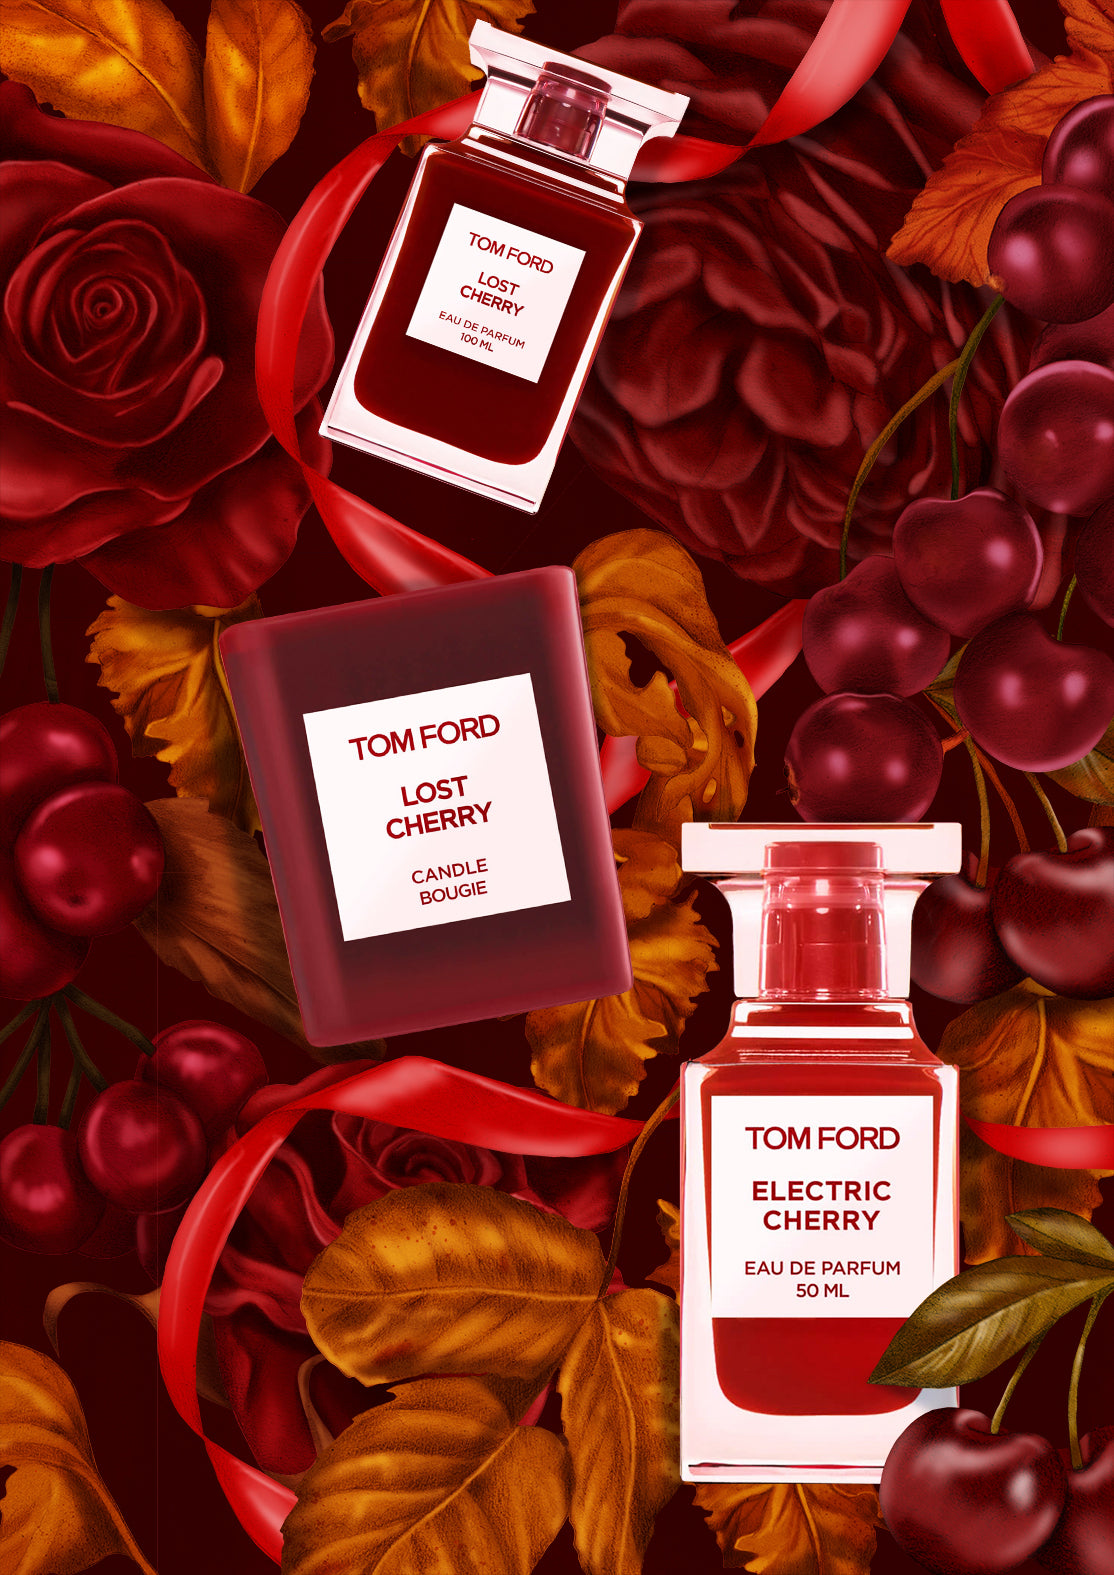 Illustration ft Tom Ford Electric Cherry and Lost Cherry fragrances by Kelly Thompson Illustration from Mecca Cosmetica